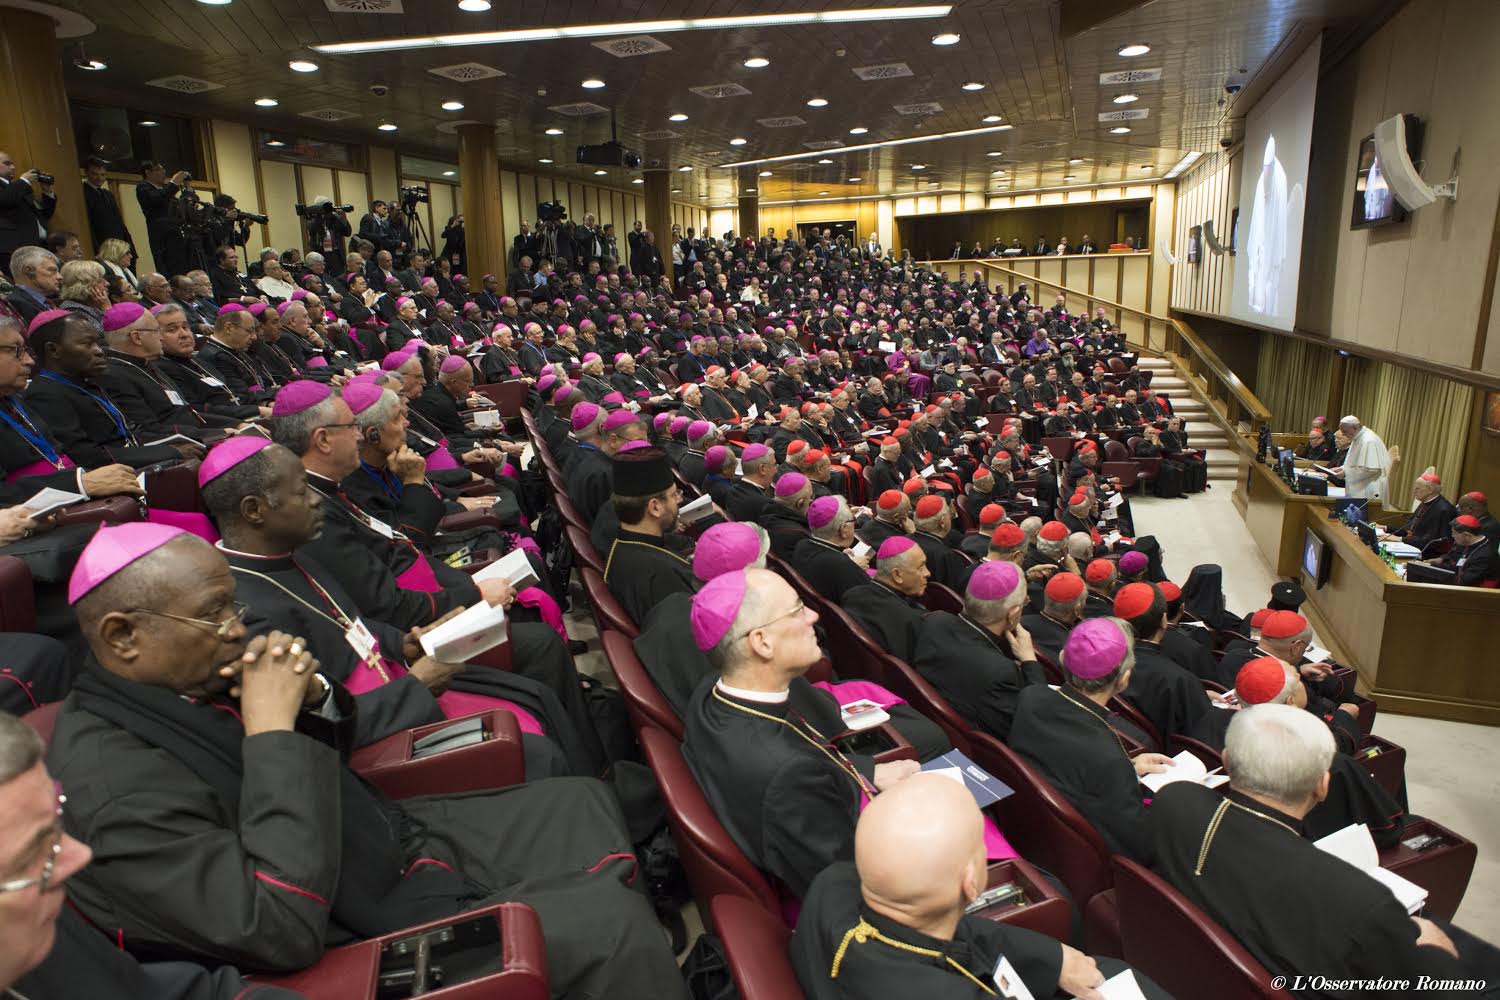 Pope Francis at the Synod of Bishops on the Family